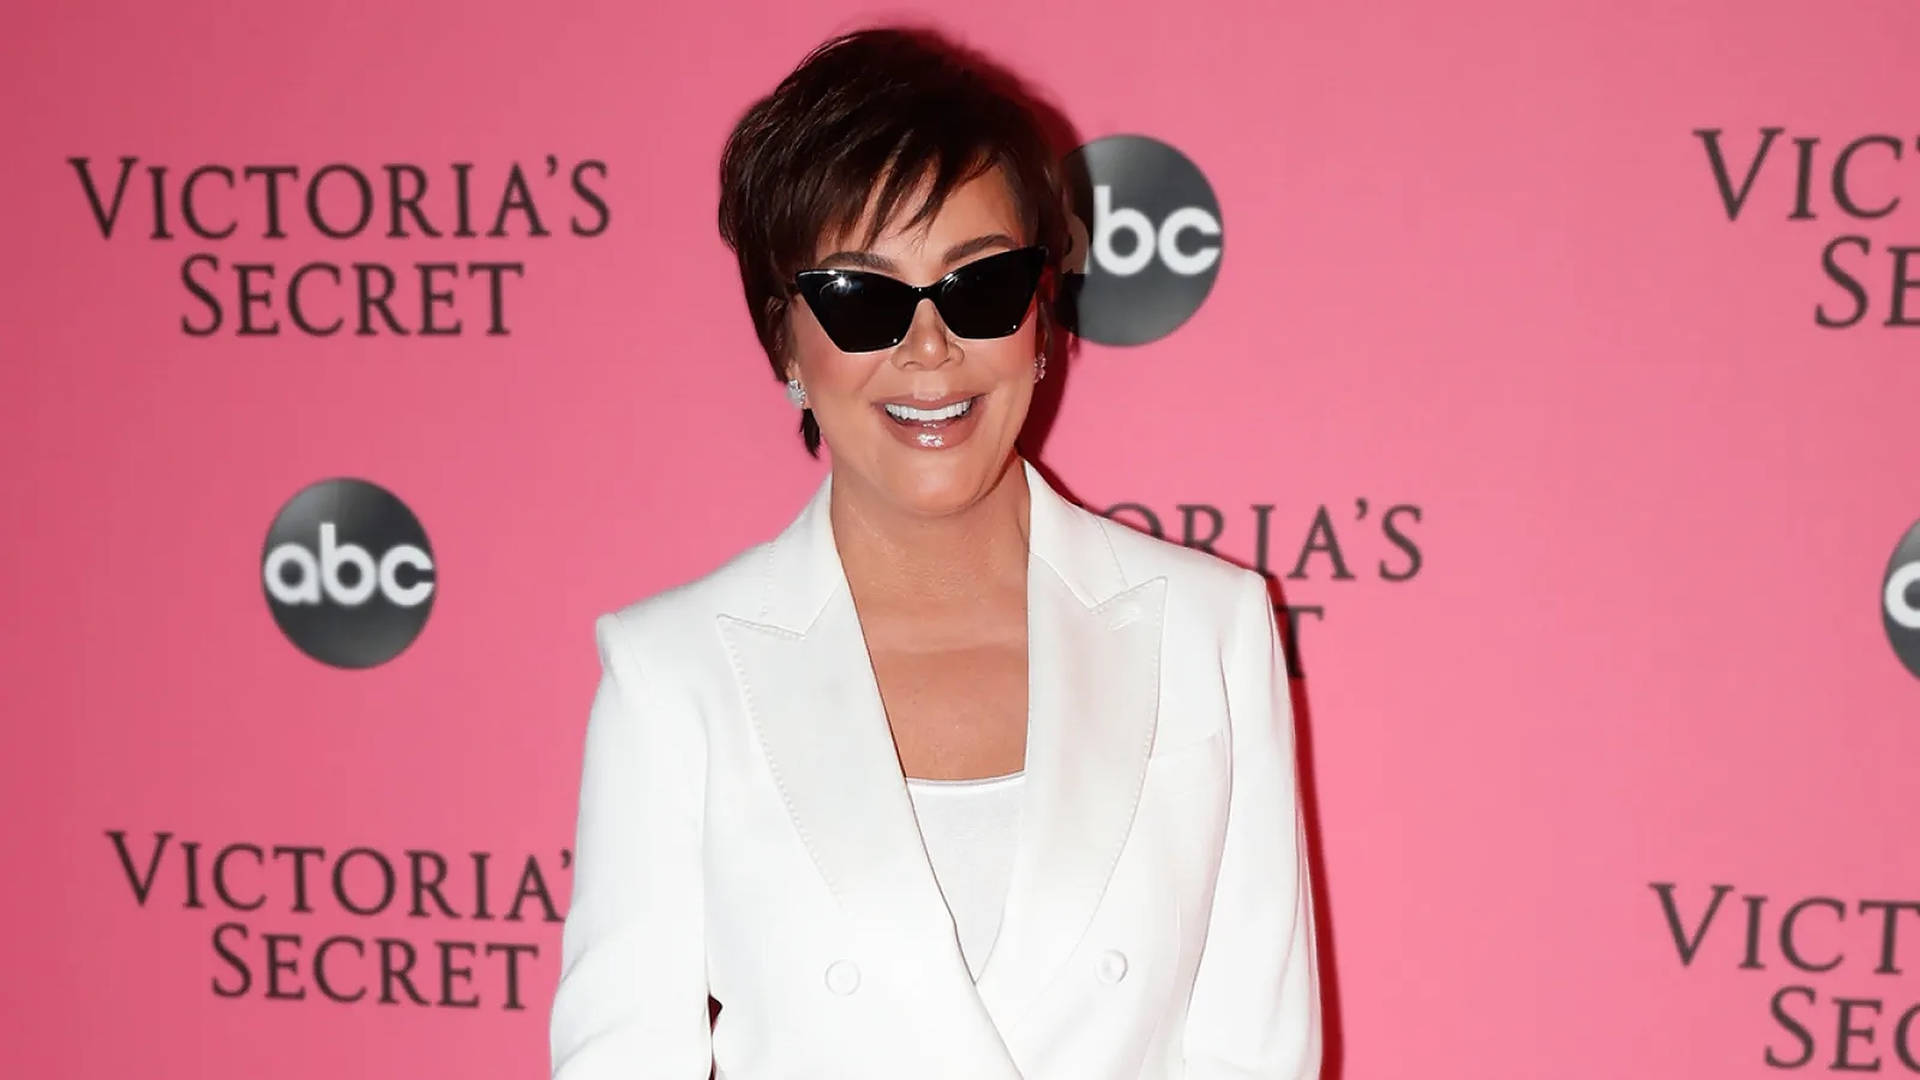 Kris Jenner At The Event Wallpaper